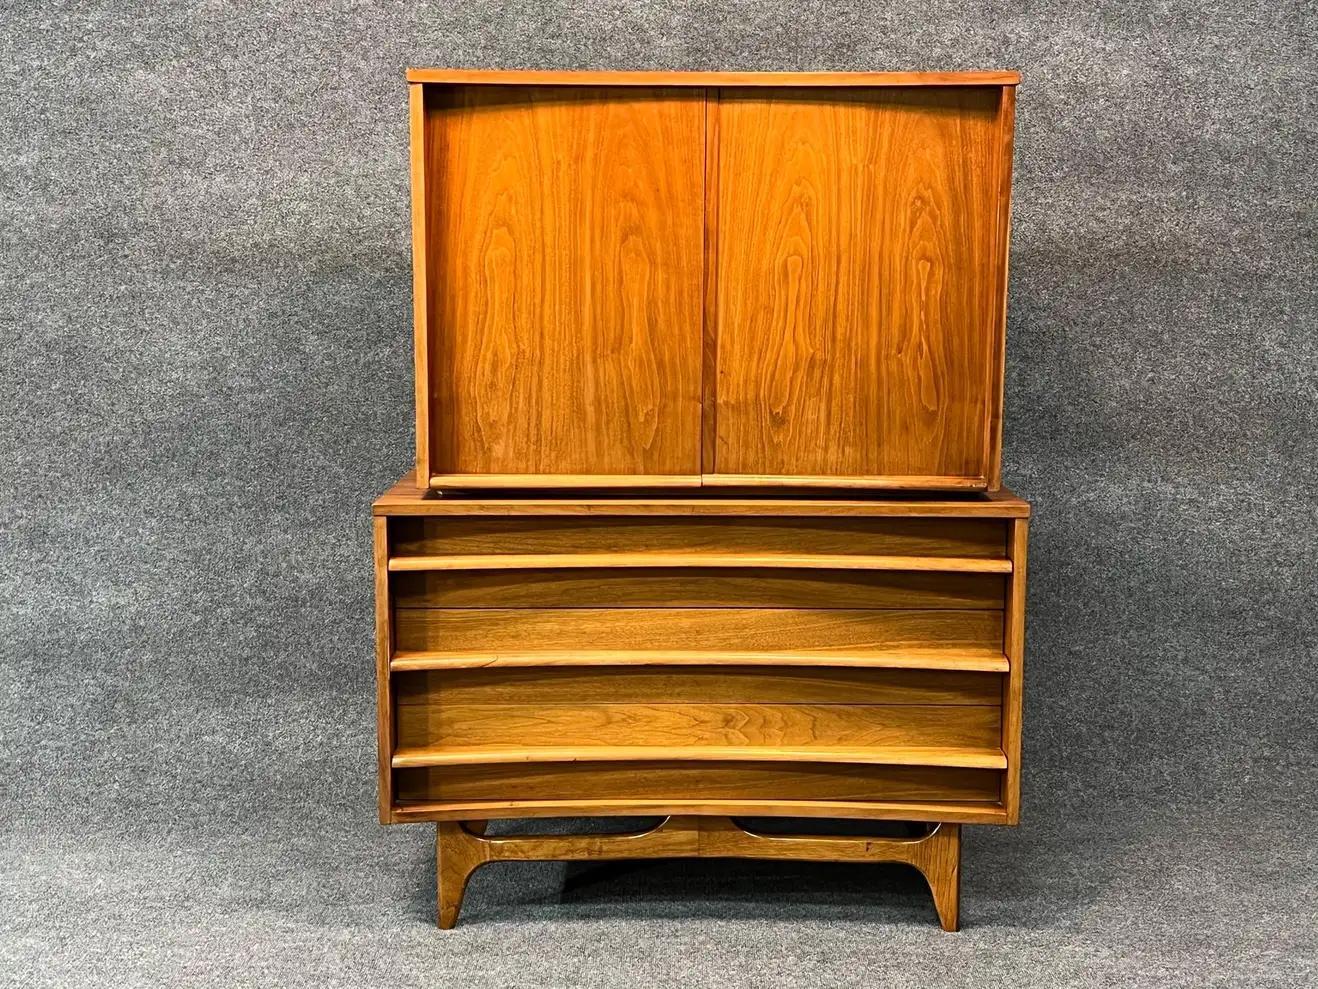 Midcentury 1960s Young Manufacturing walnut gentlemen's chest. Featuring a graciously curved Front Design, nine drawers for storage, and a beautiful walnut finish. An extraordinary design to complete your bedroom as a dresser or living room as a